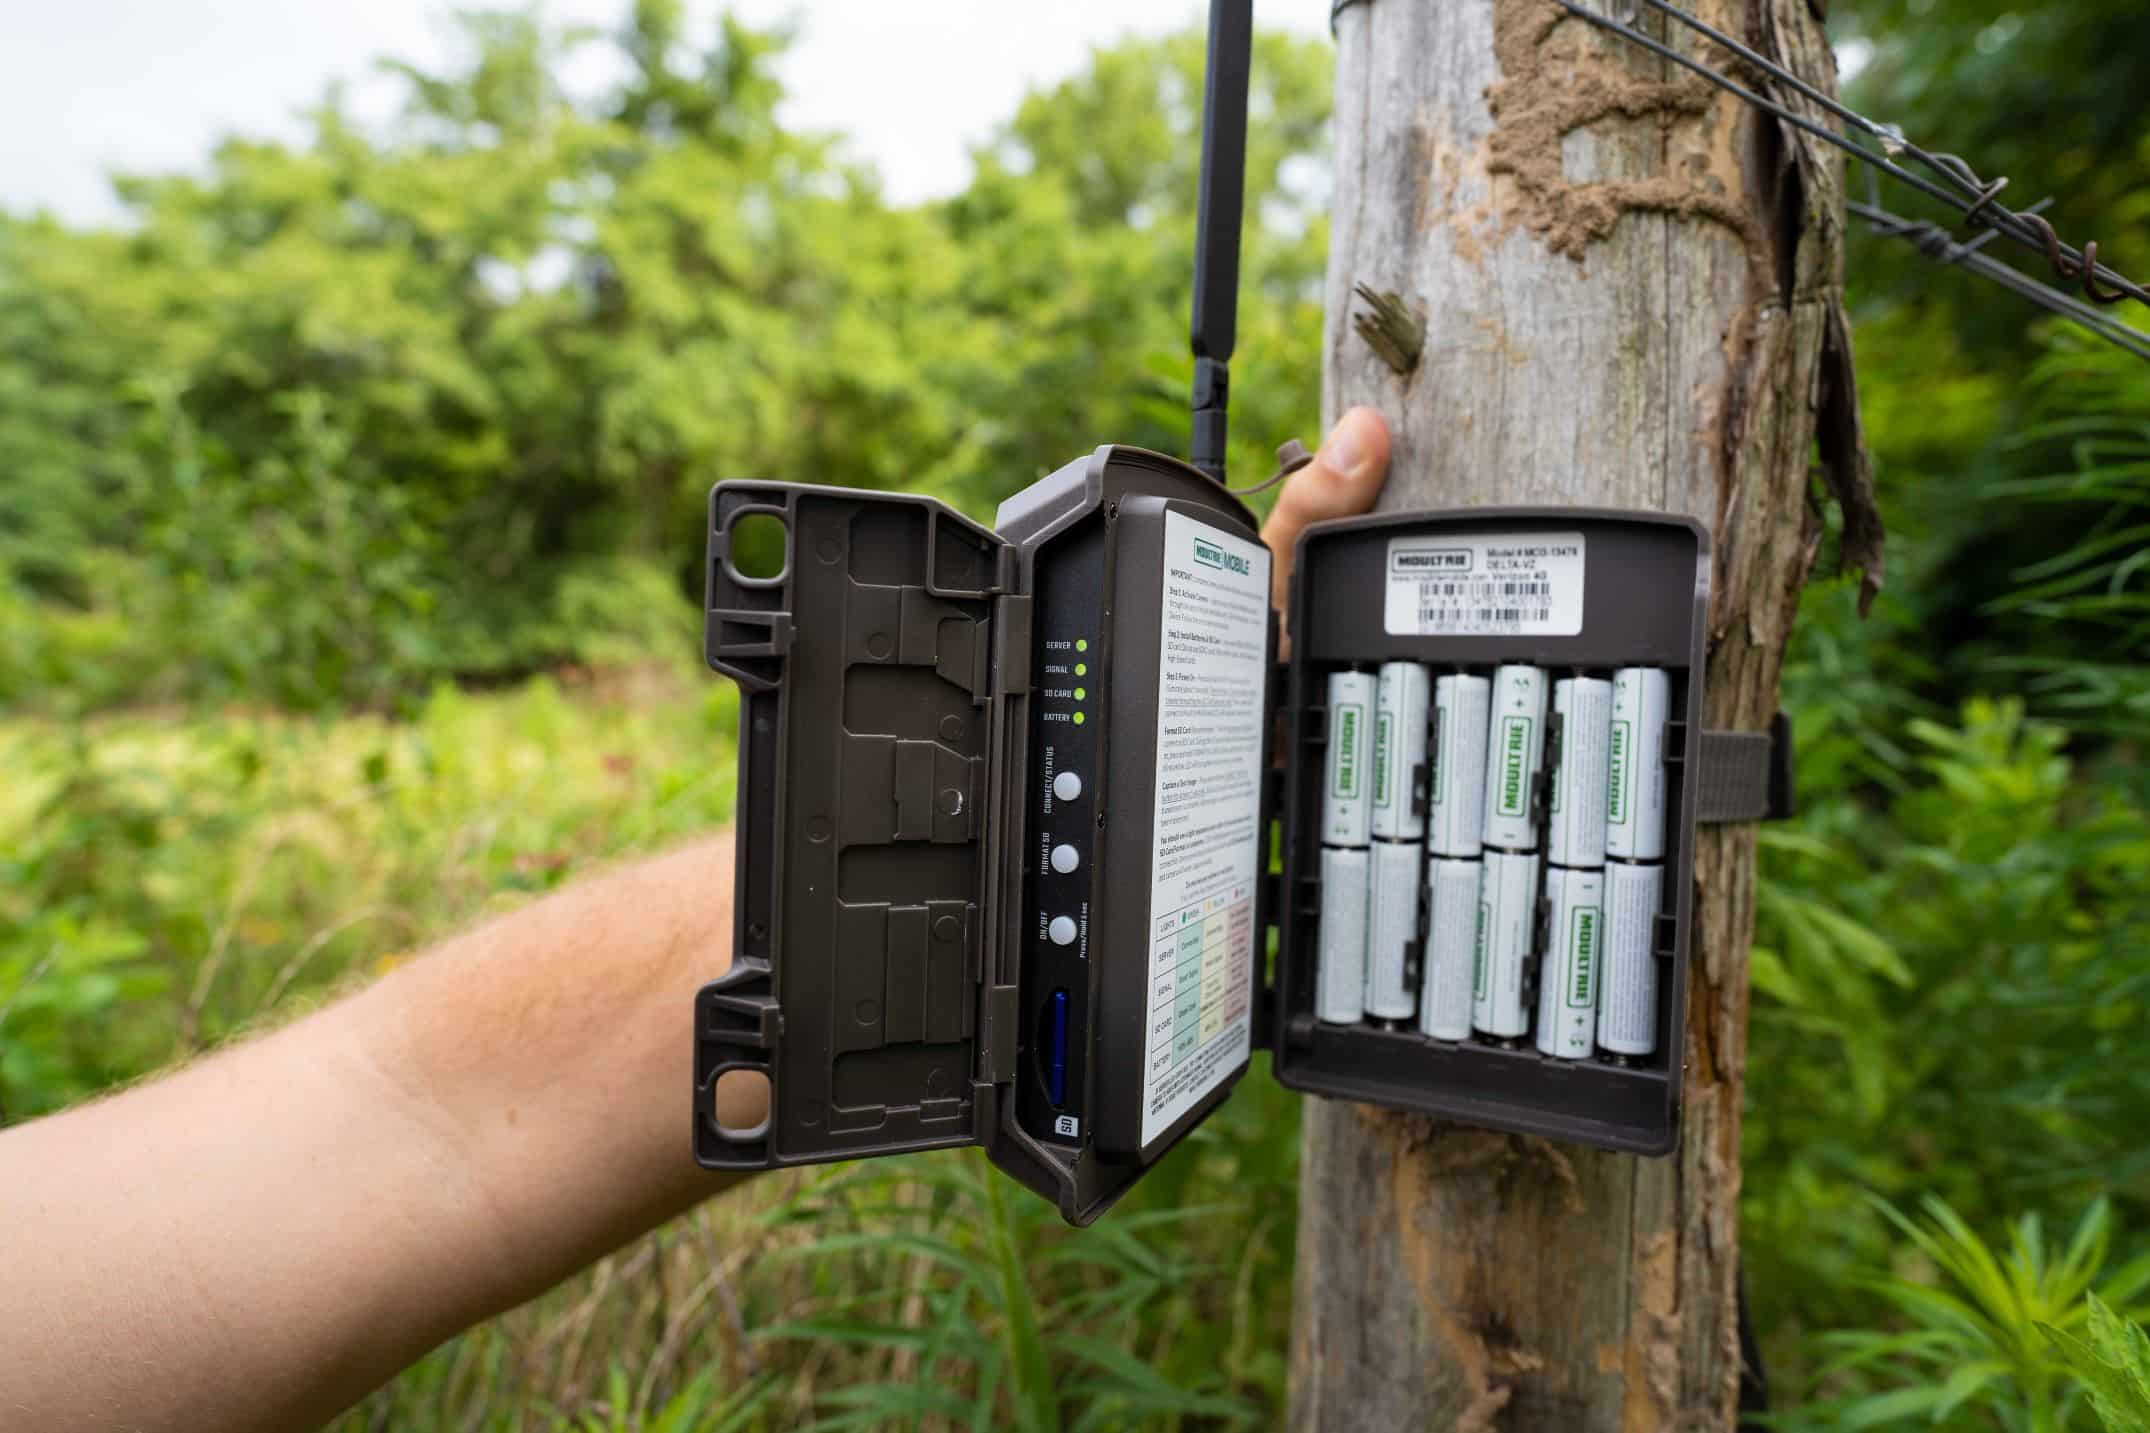 trail-camera-draining-batteries-what-to-do